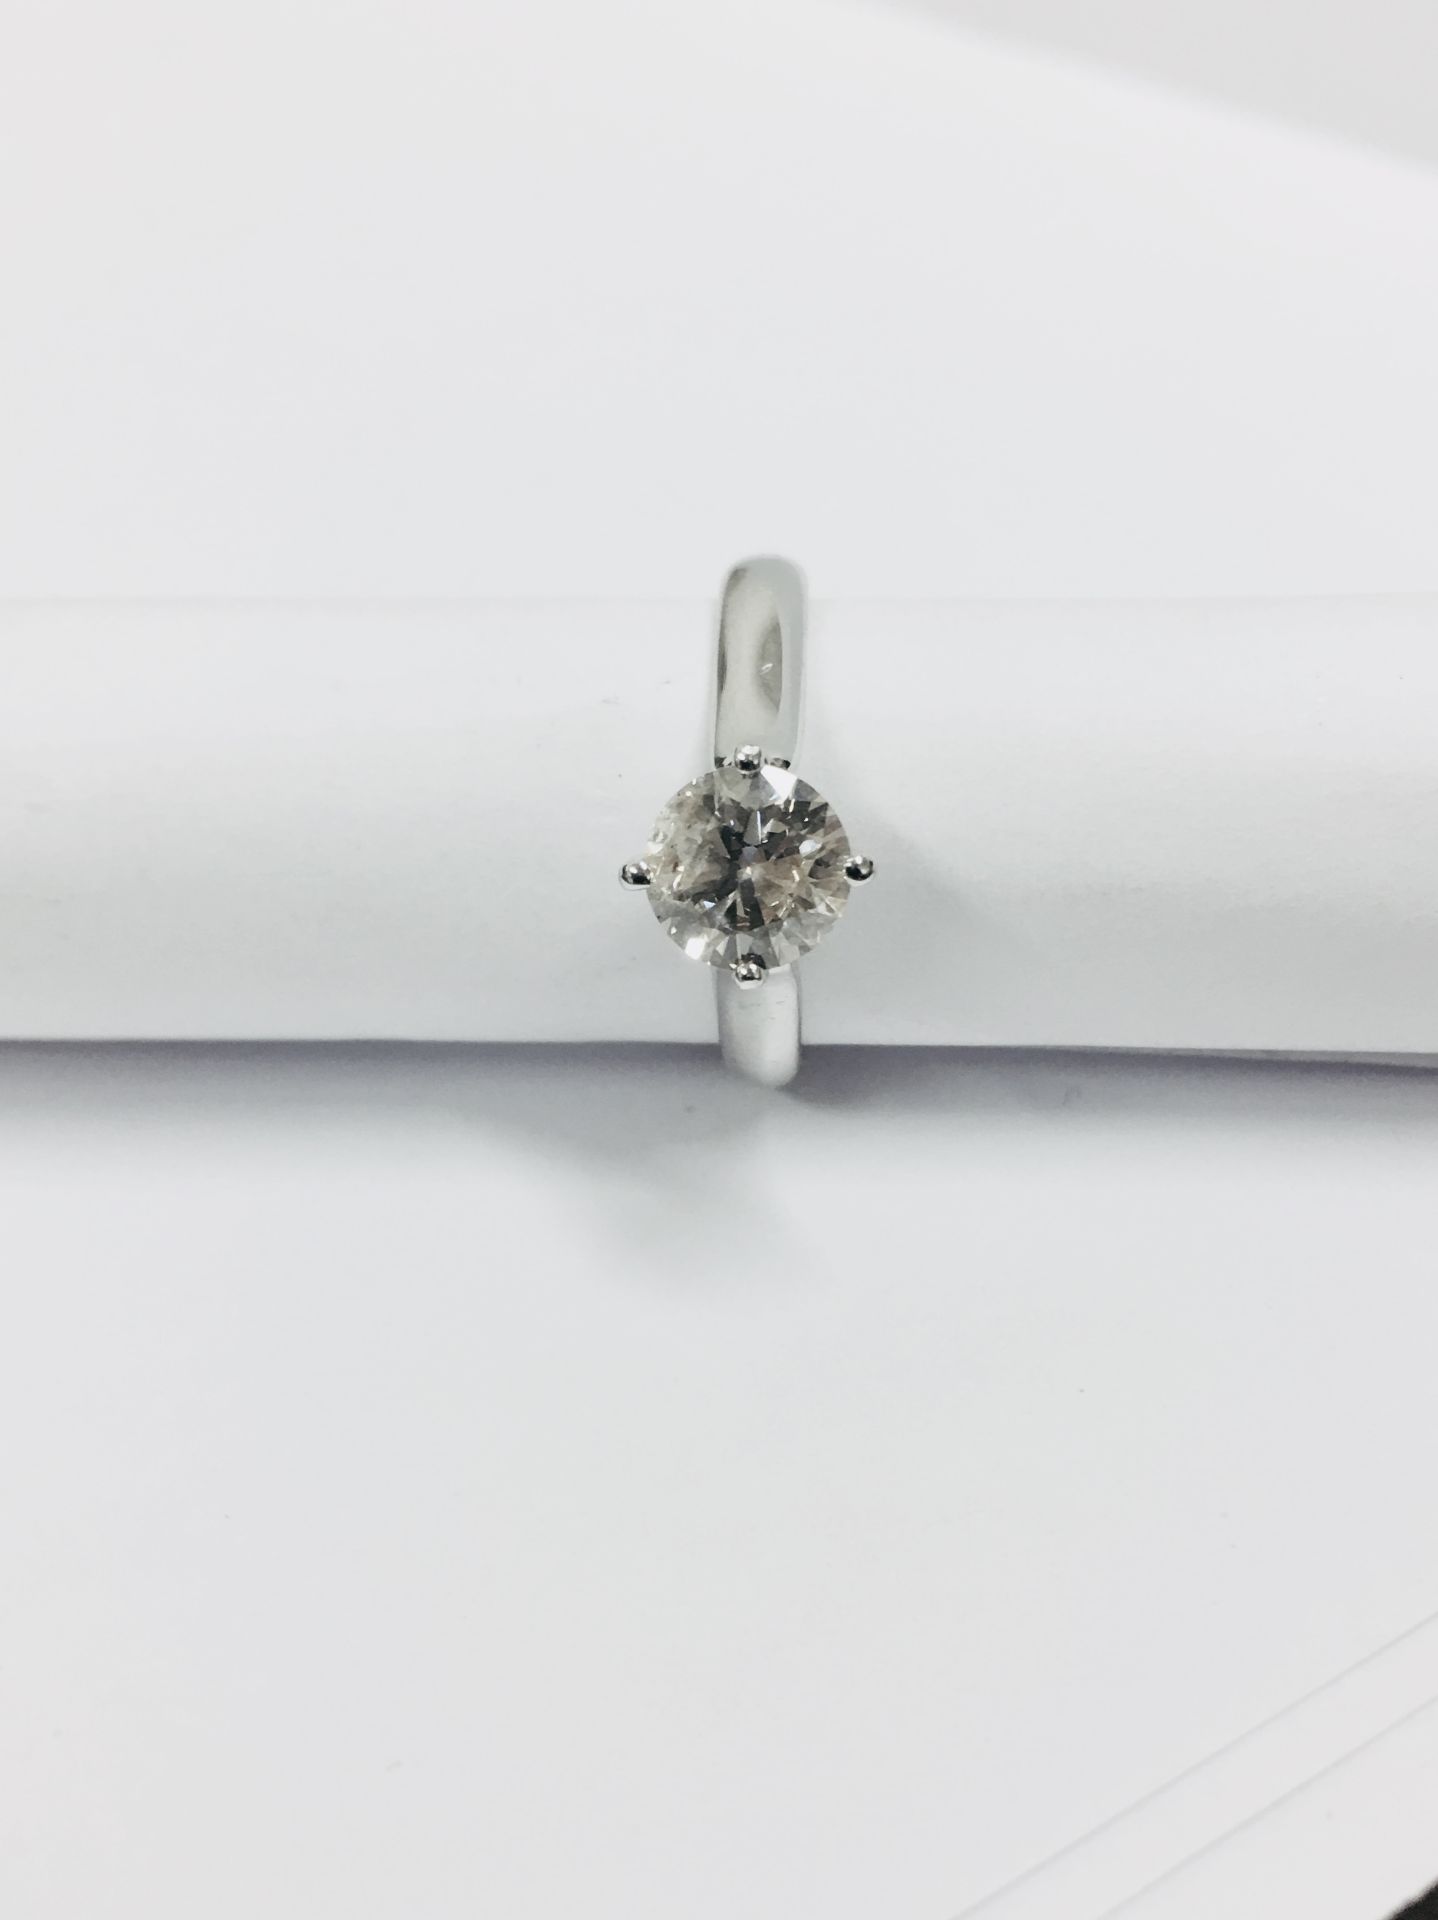 1.09ct diamond solitaire ring set in 18ct gold. Brilliant cut diamond G colour and SI2 clarity. ( - Image 5 of 6